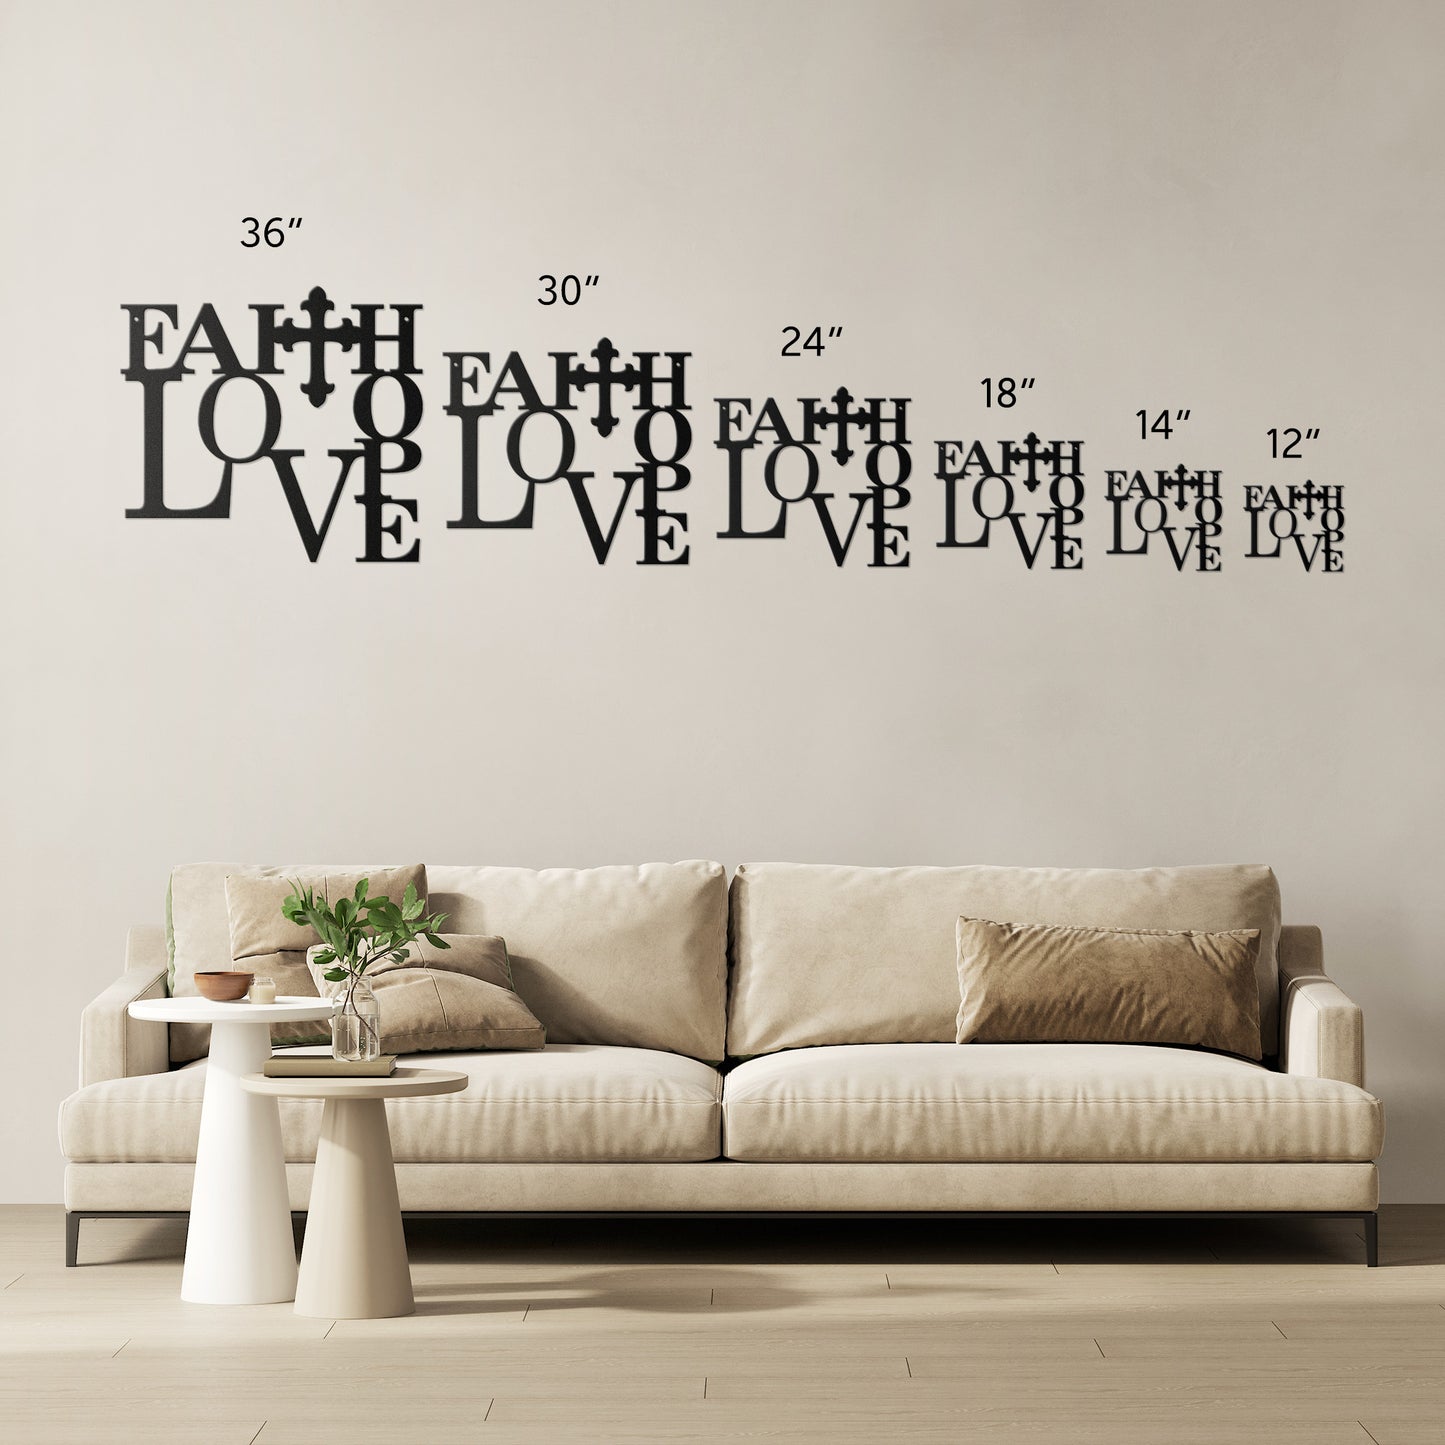 Faith, Hope, and Love Metal Wall Art for a Charming and Rustic Look - Metal Art - USA